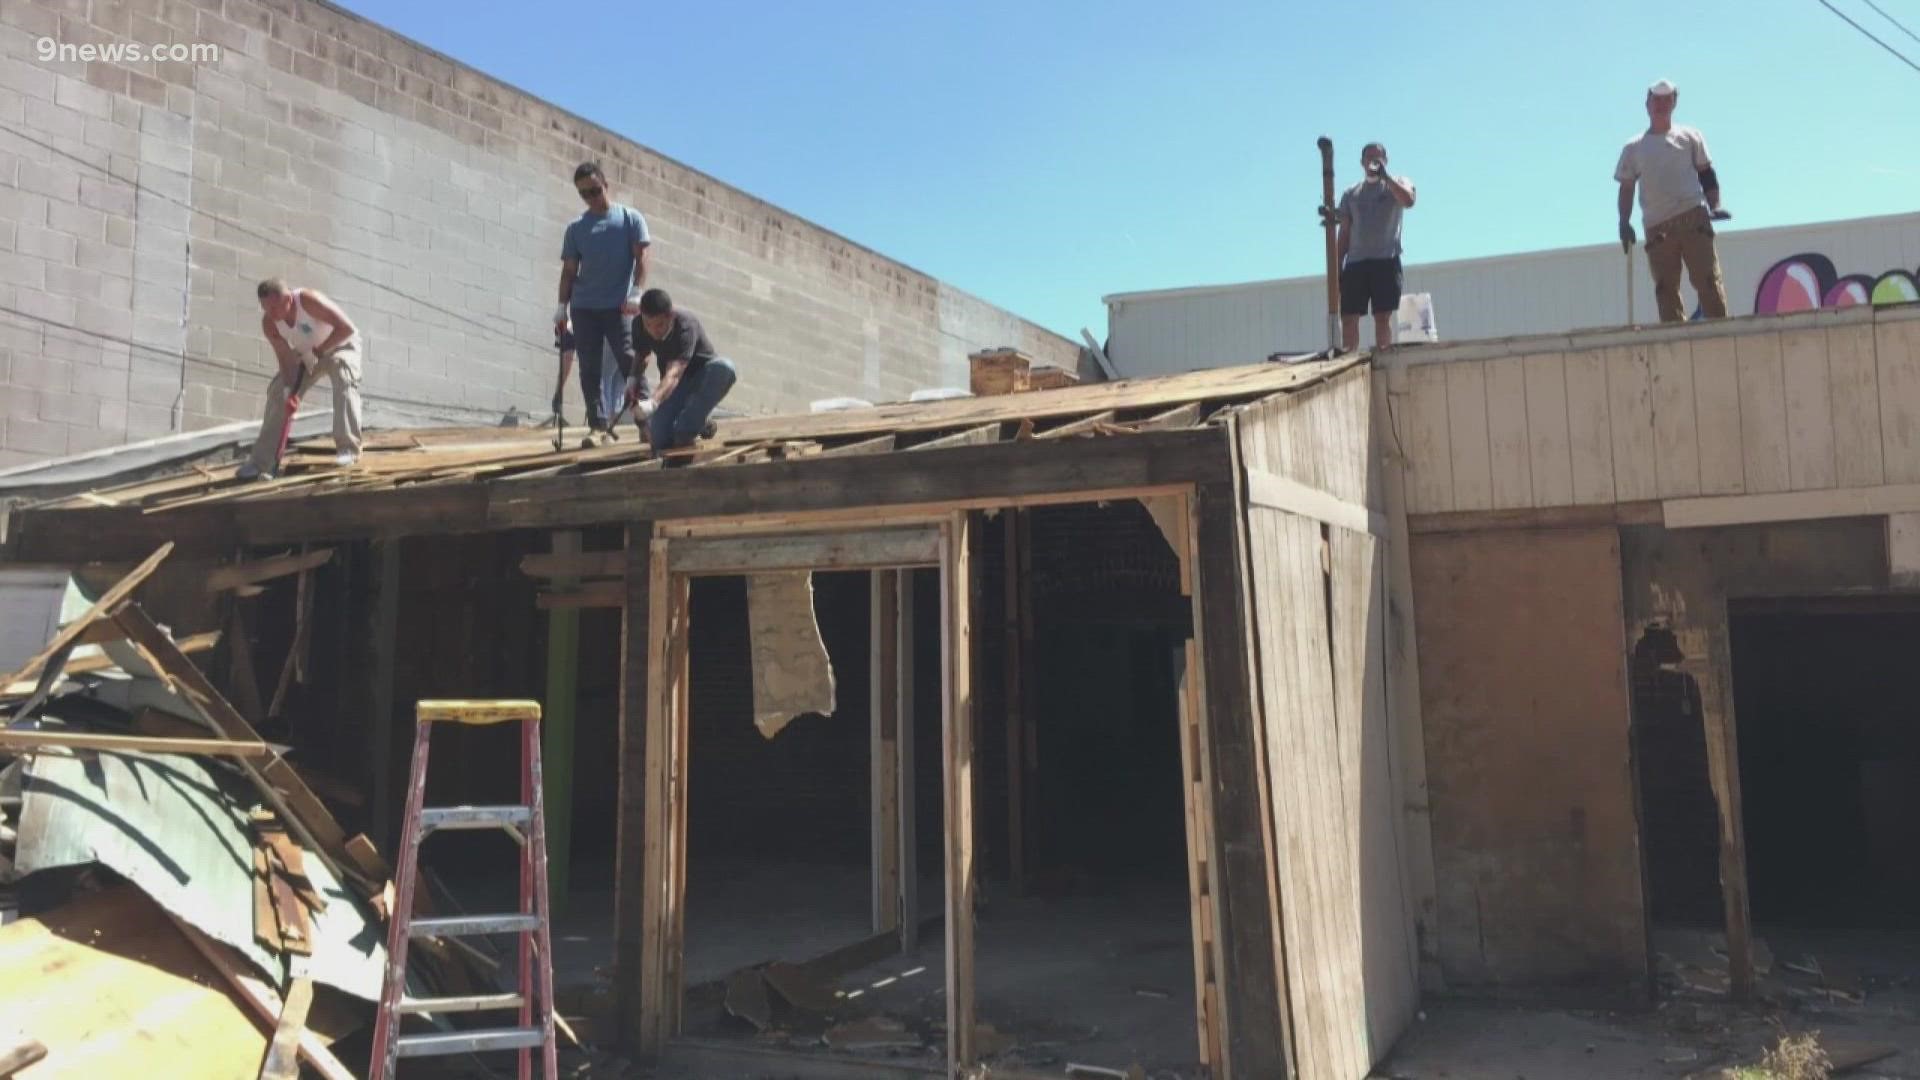 VFW Post 1 in Denver is renovating its building so that it can become a community center for all veteran, but they need help finishing the work.